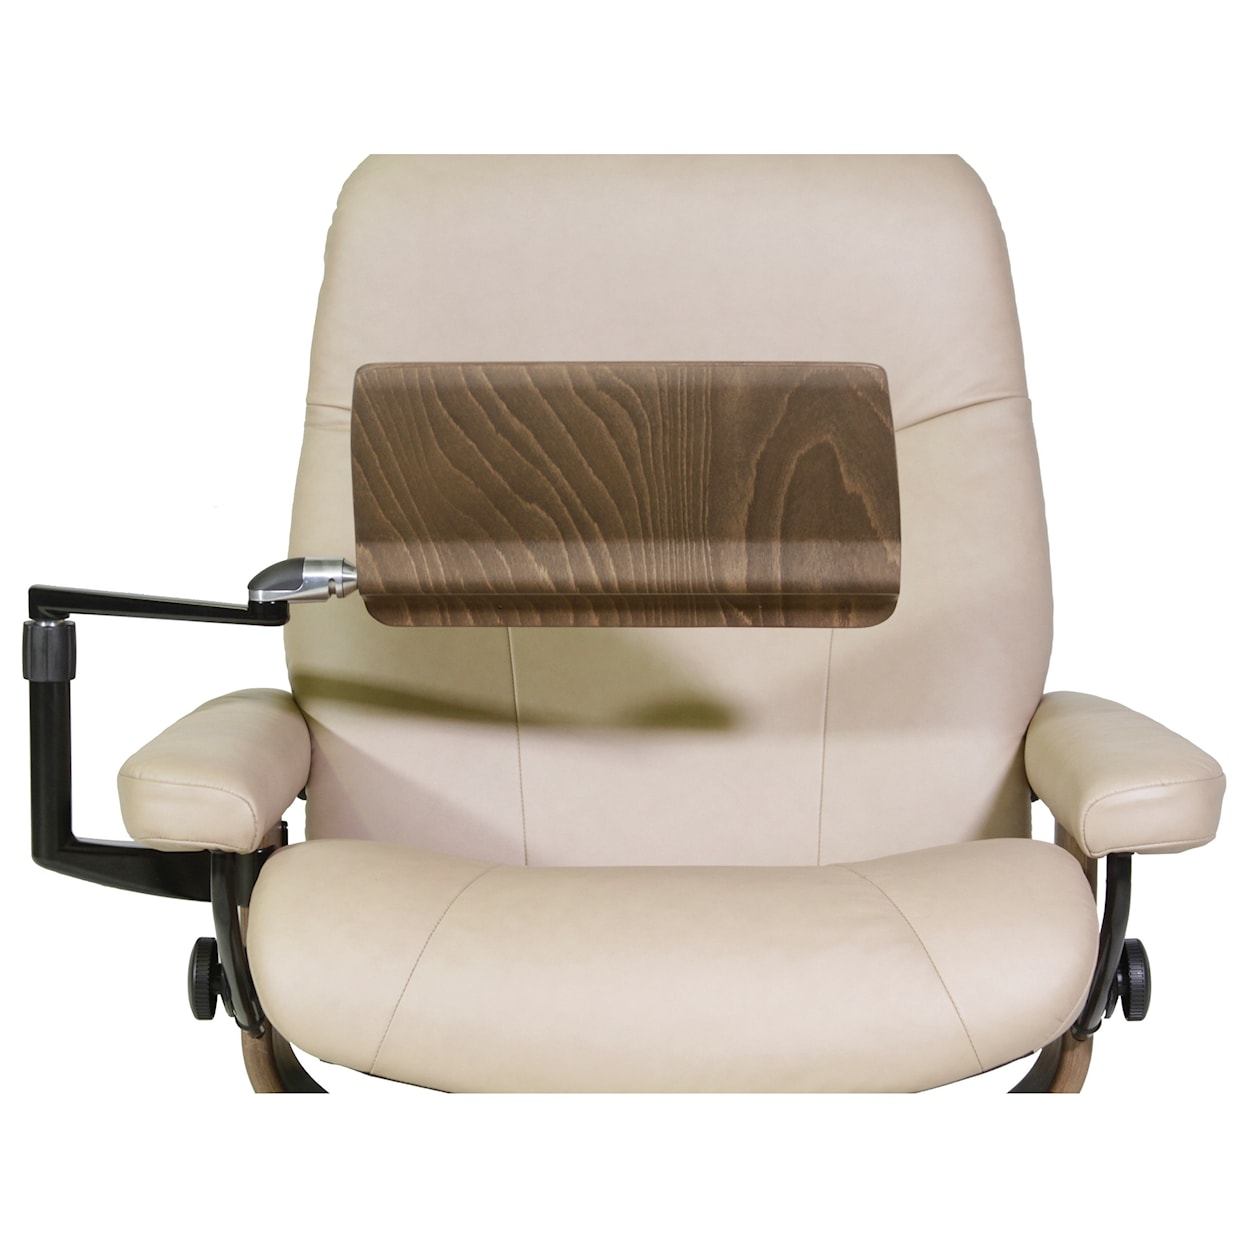 Stressless by Ekornes Tables Personal Table